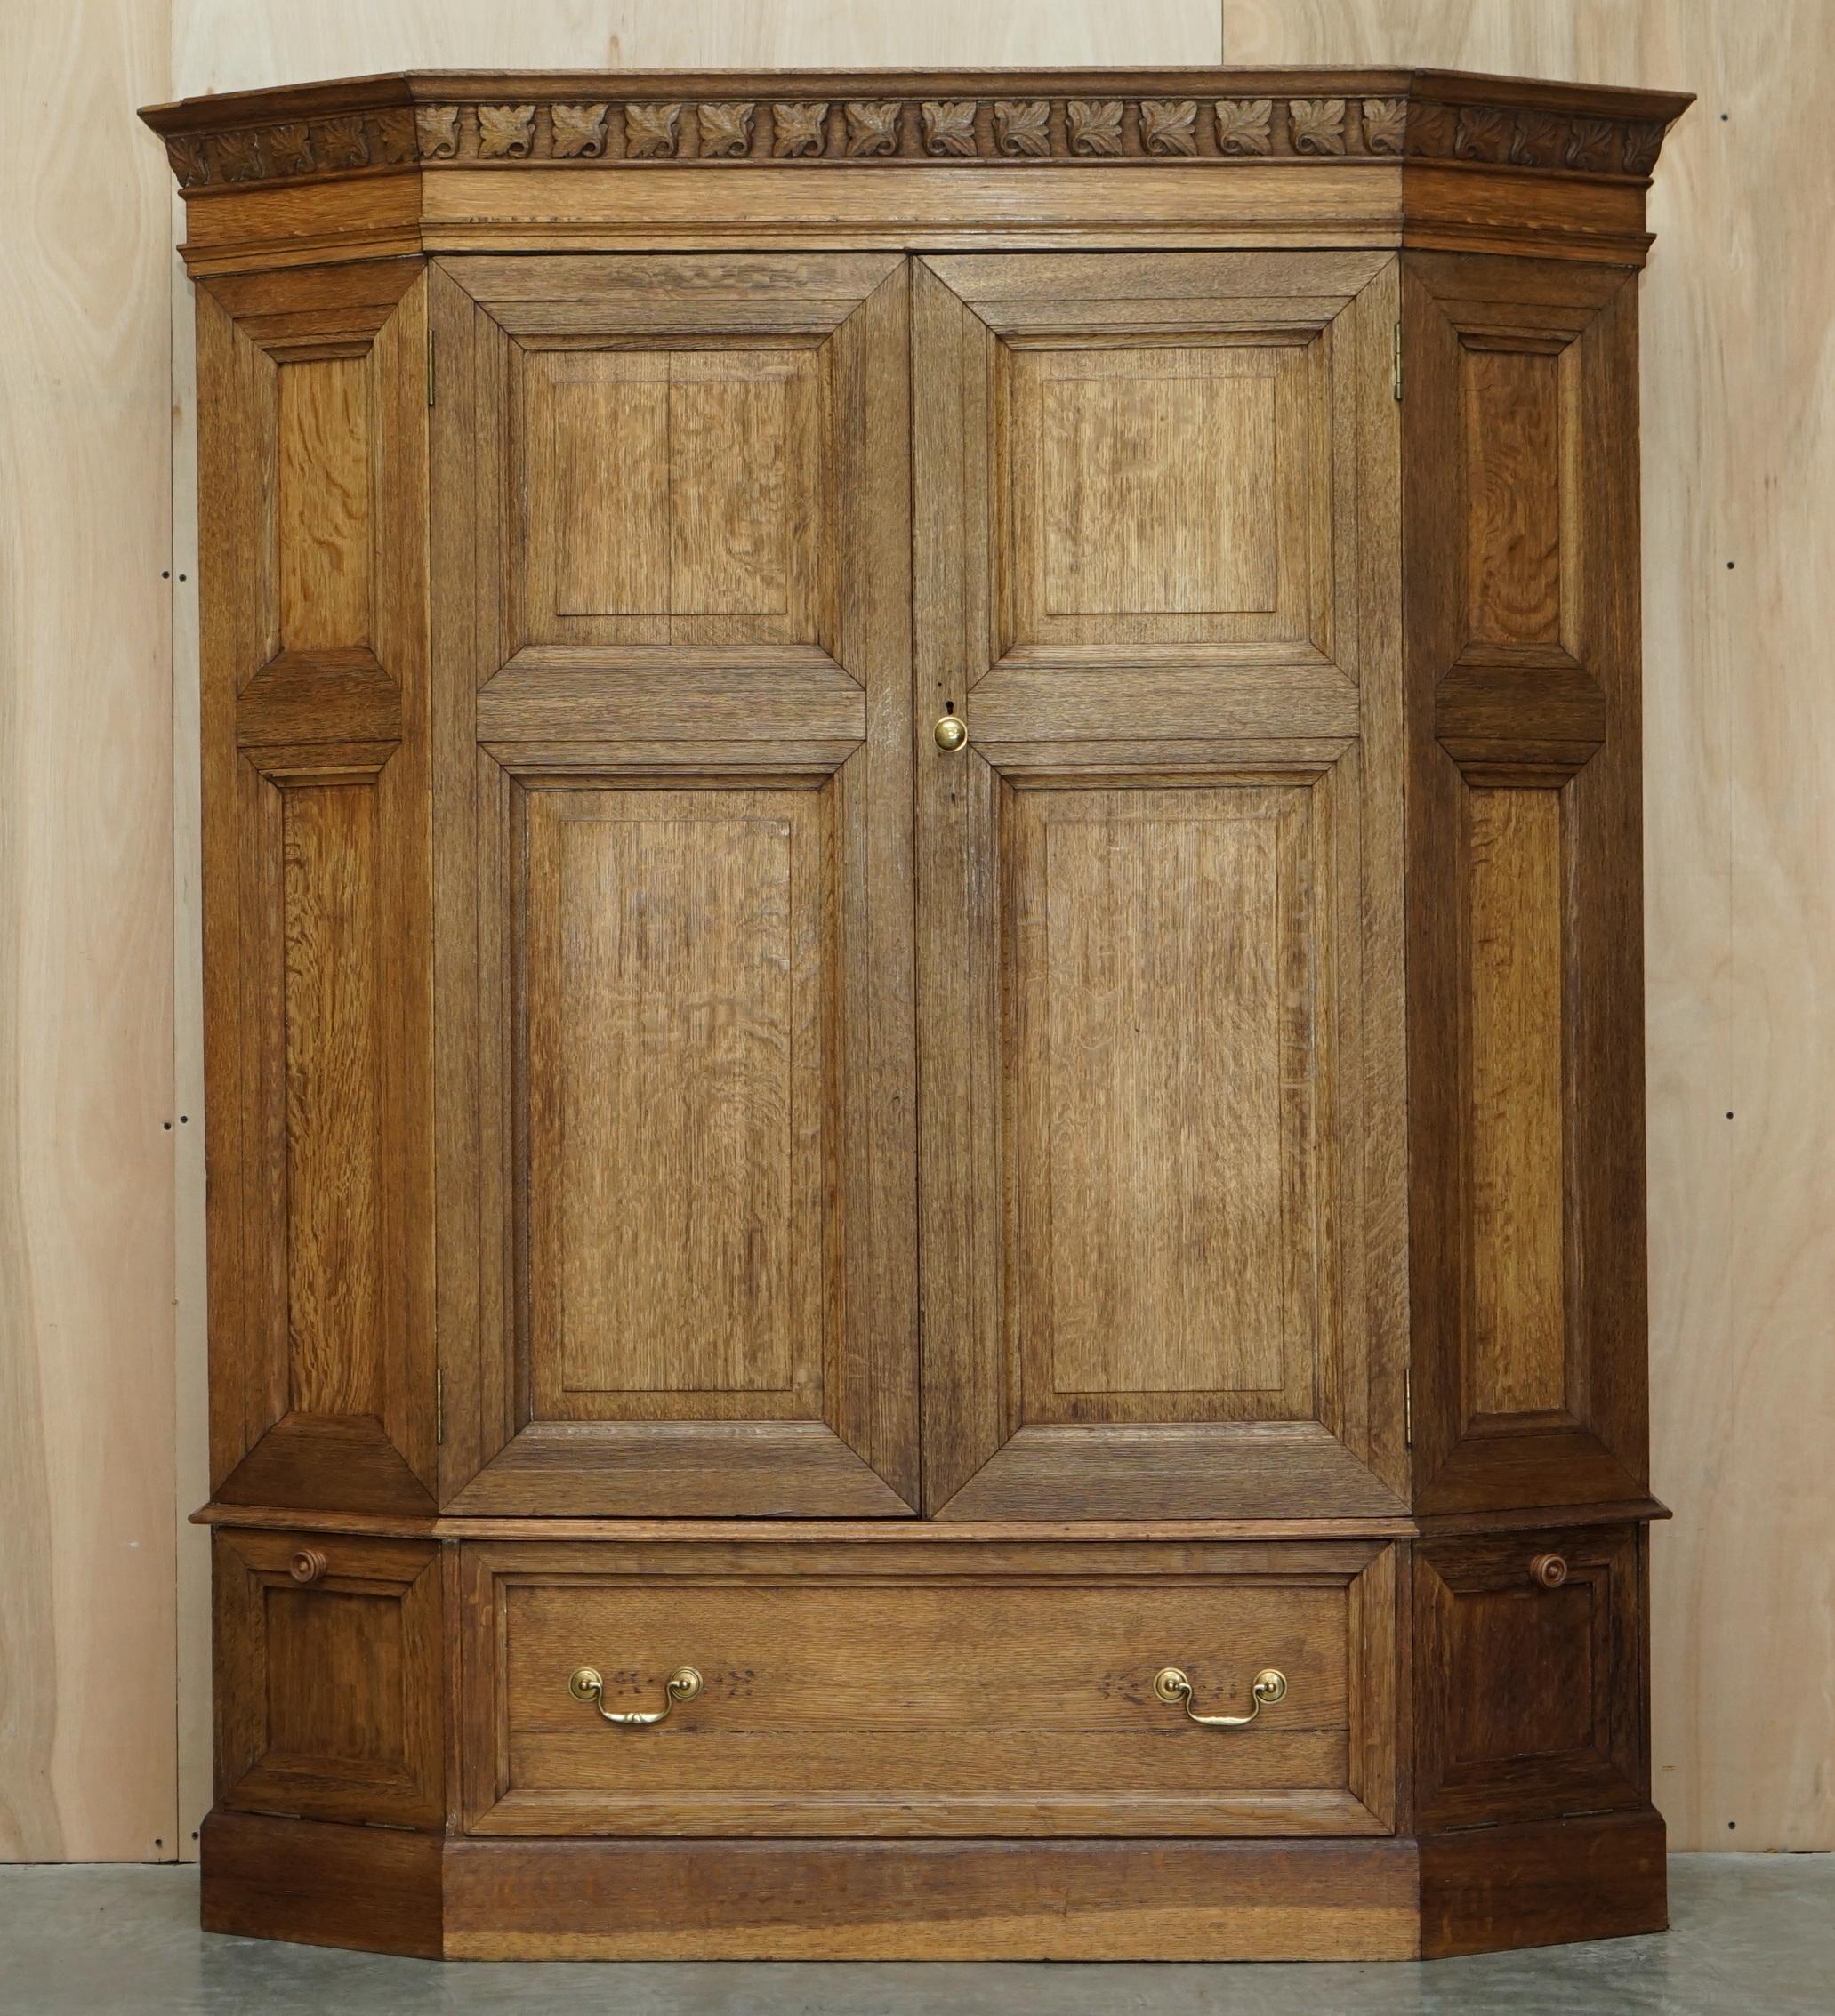 We are delighted to offer for sale this stunning highly collectible Victorian pine housekeepers cupboard for linens or pots

A very charming and highly collectable piece, this is one of the larger examples I have come across, it has huge amounts of